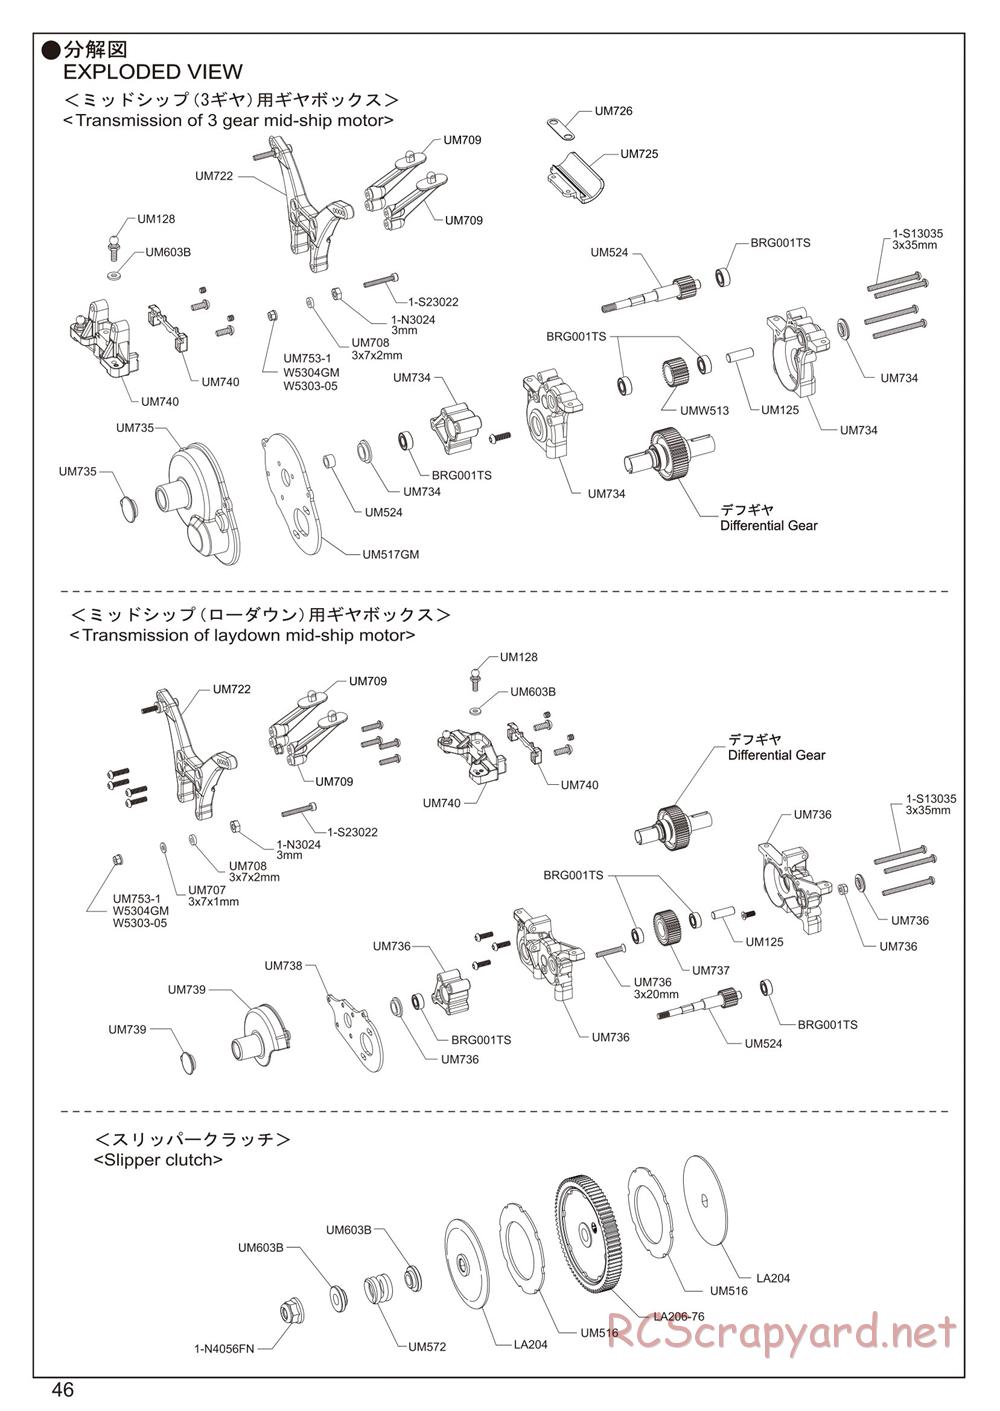 Kyosho - Ultima RB6.6 - Exploded Views - Page 4